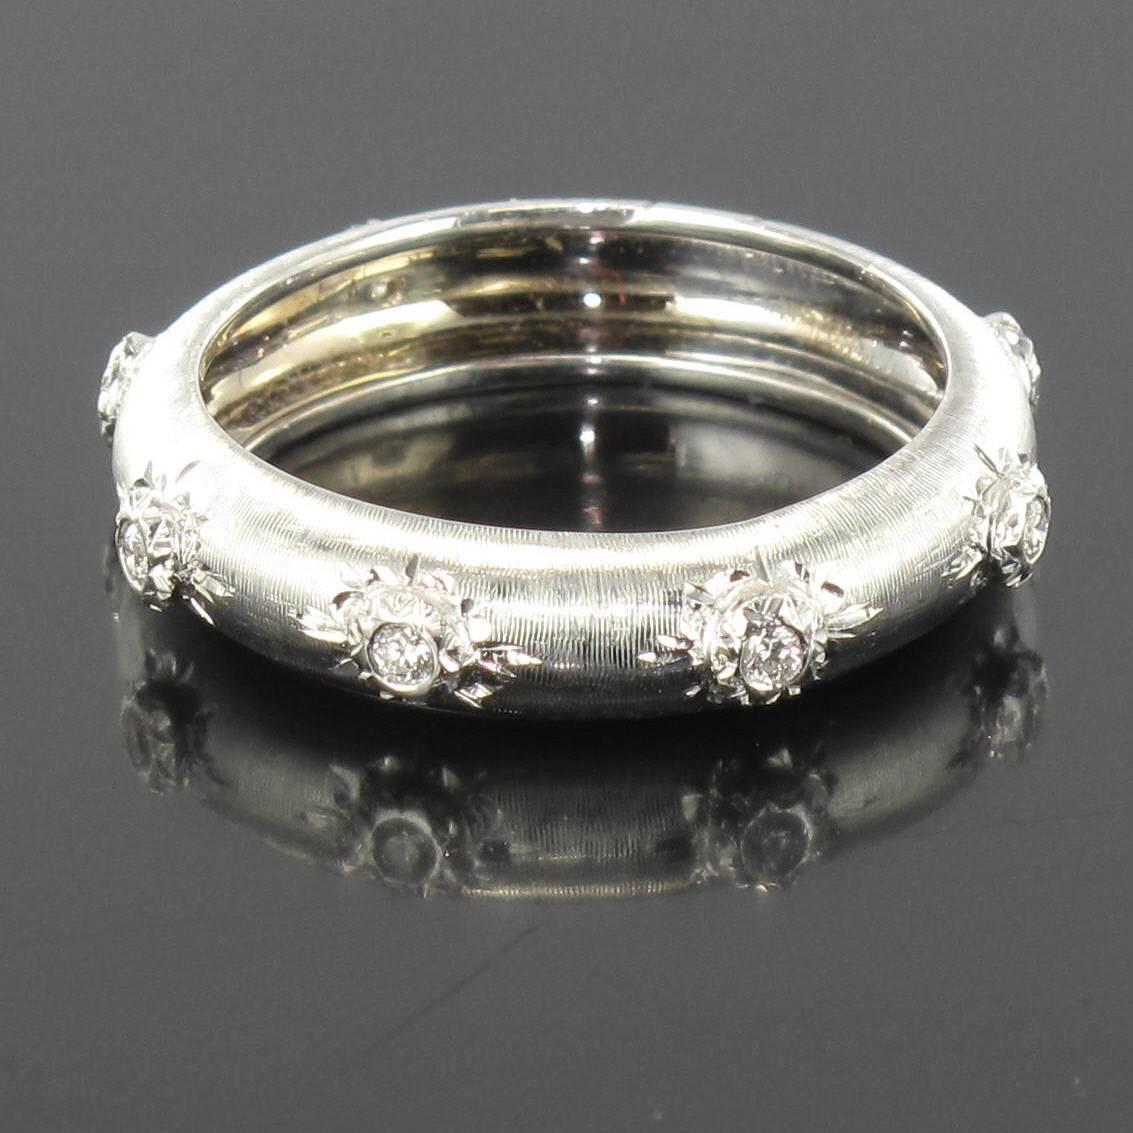 Ring in 18 carat white gold.

Superb rounded brushed white gold ring, engraved and set with 7 brilliant cut diamonds. This ring would admirably fit the role as an exquisite eternity ring. 

Total diamond weight: about 0.10 carat.
Width: 4.6